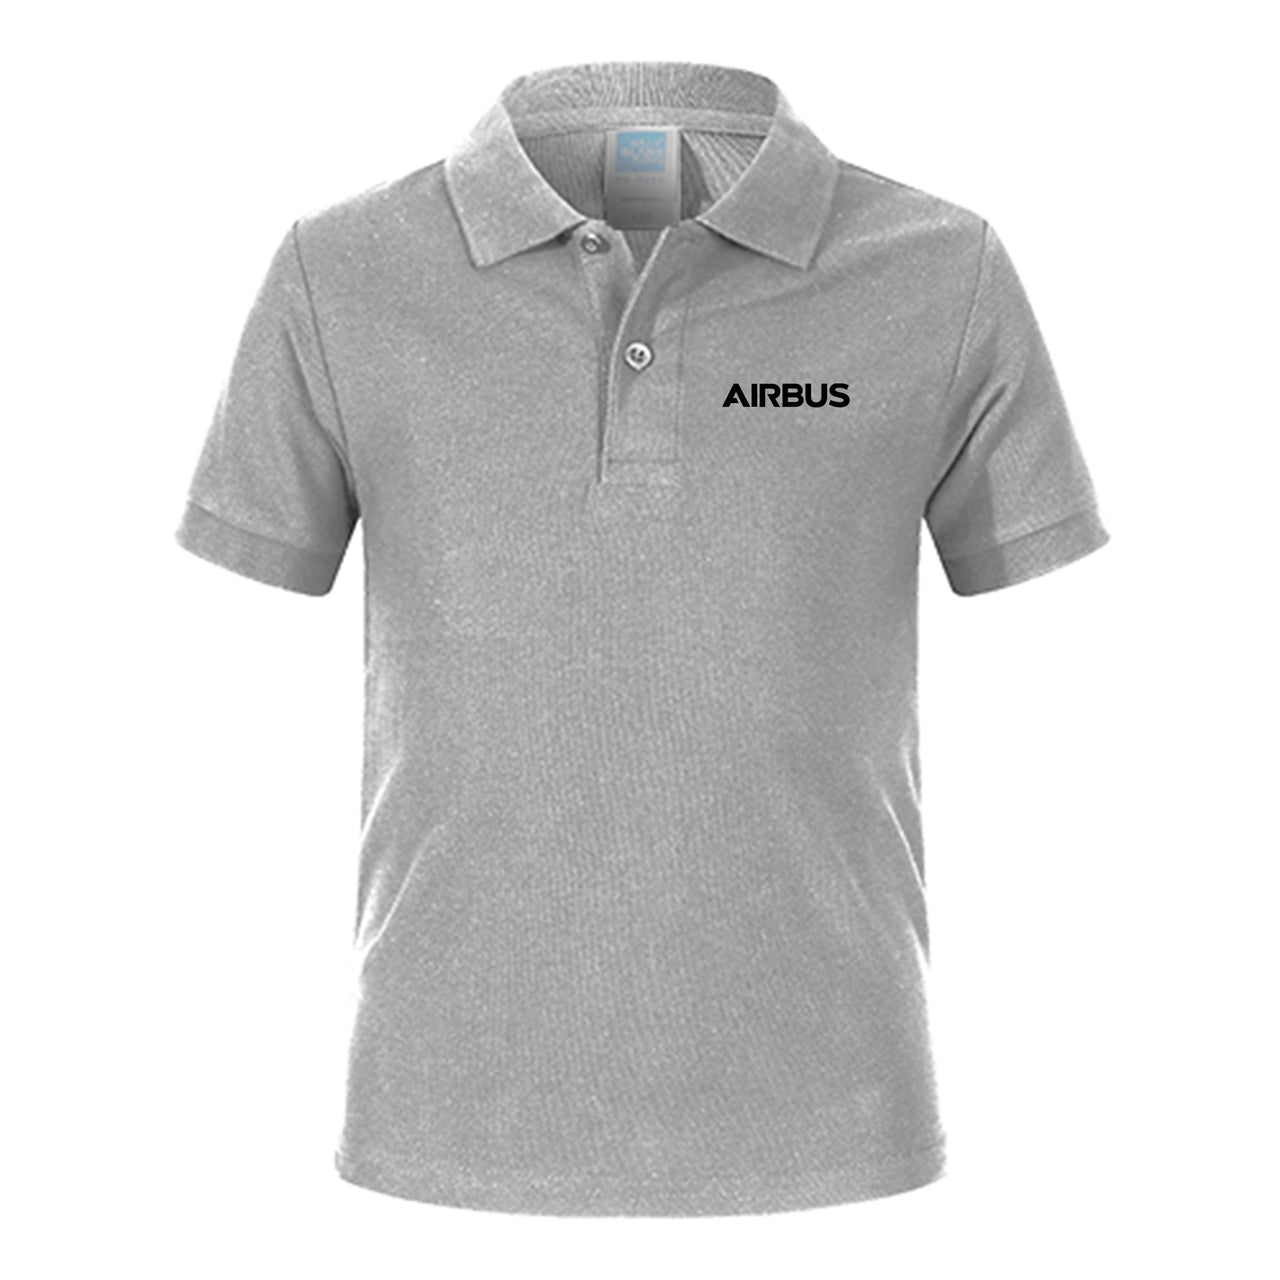 Airbus & Text Designed Children Polo T-Shirts